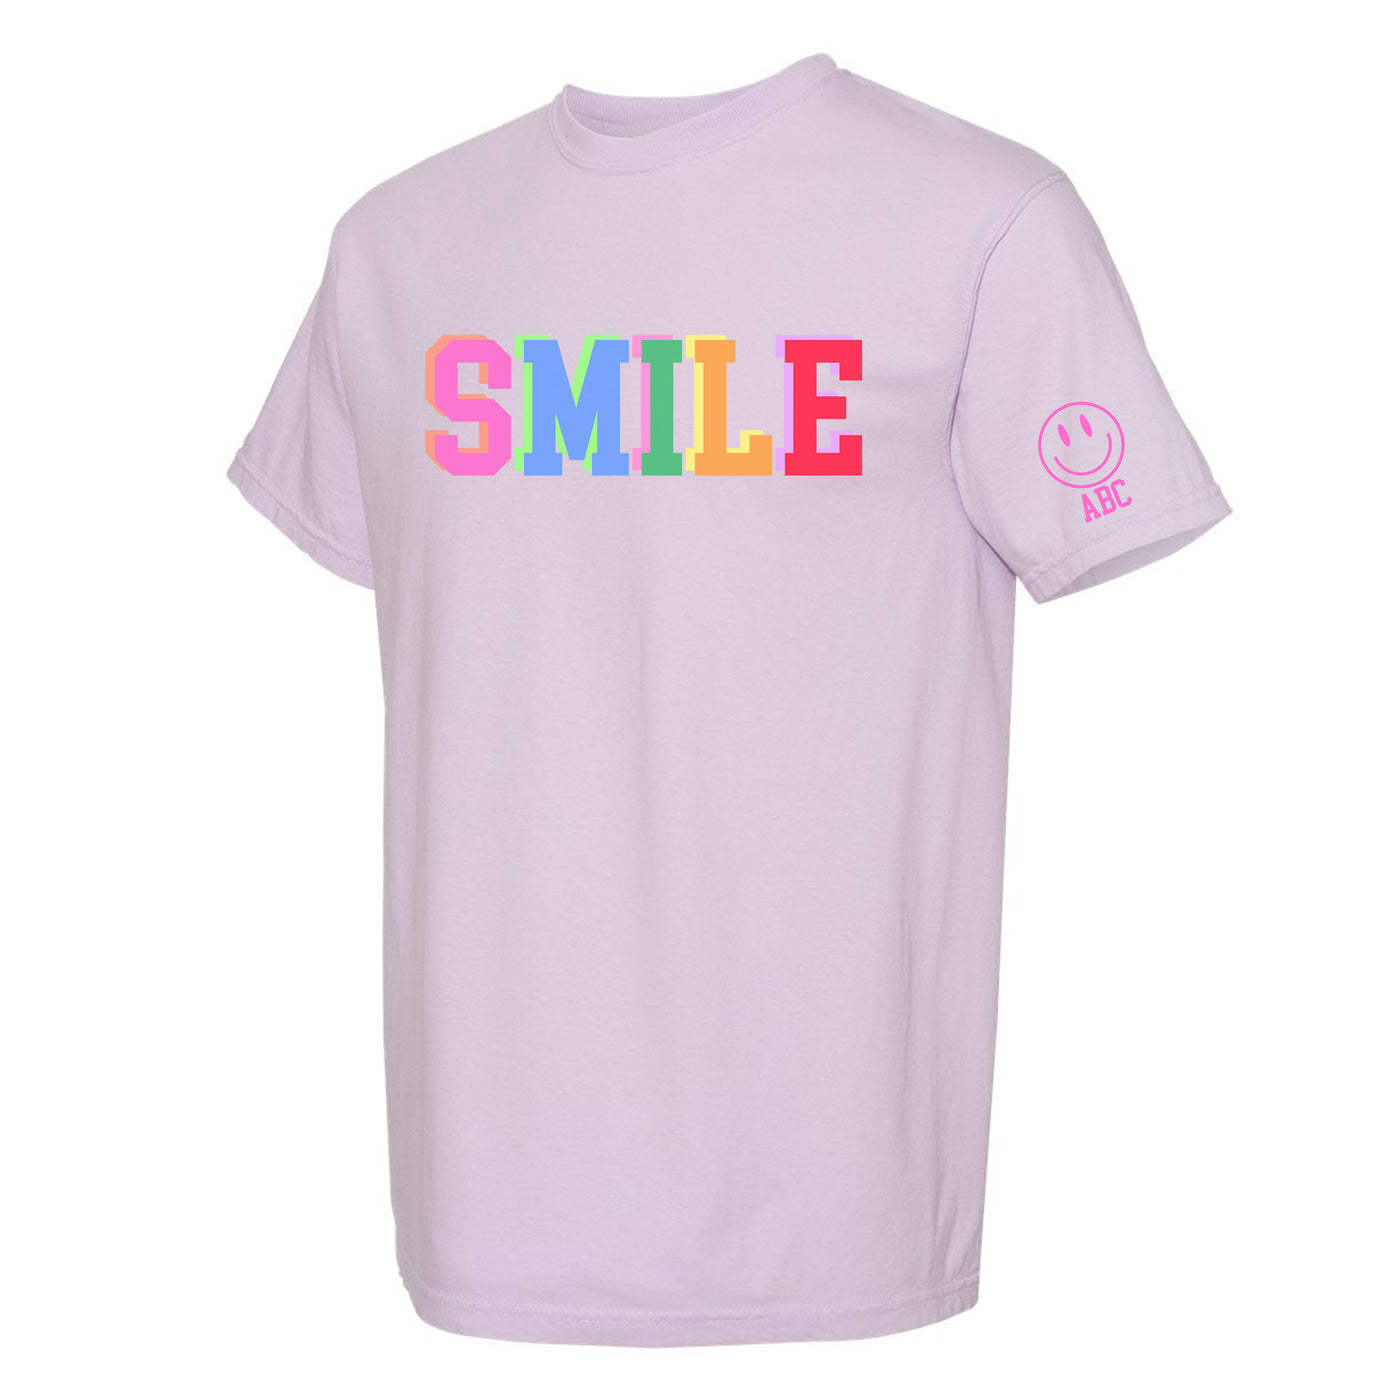 Initialed Colorful Block 'Smile' Tee